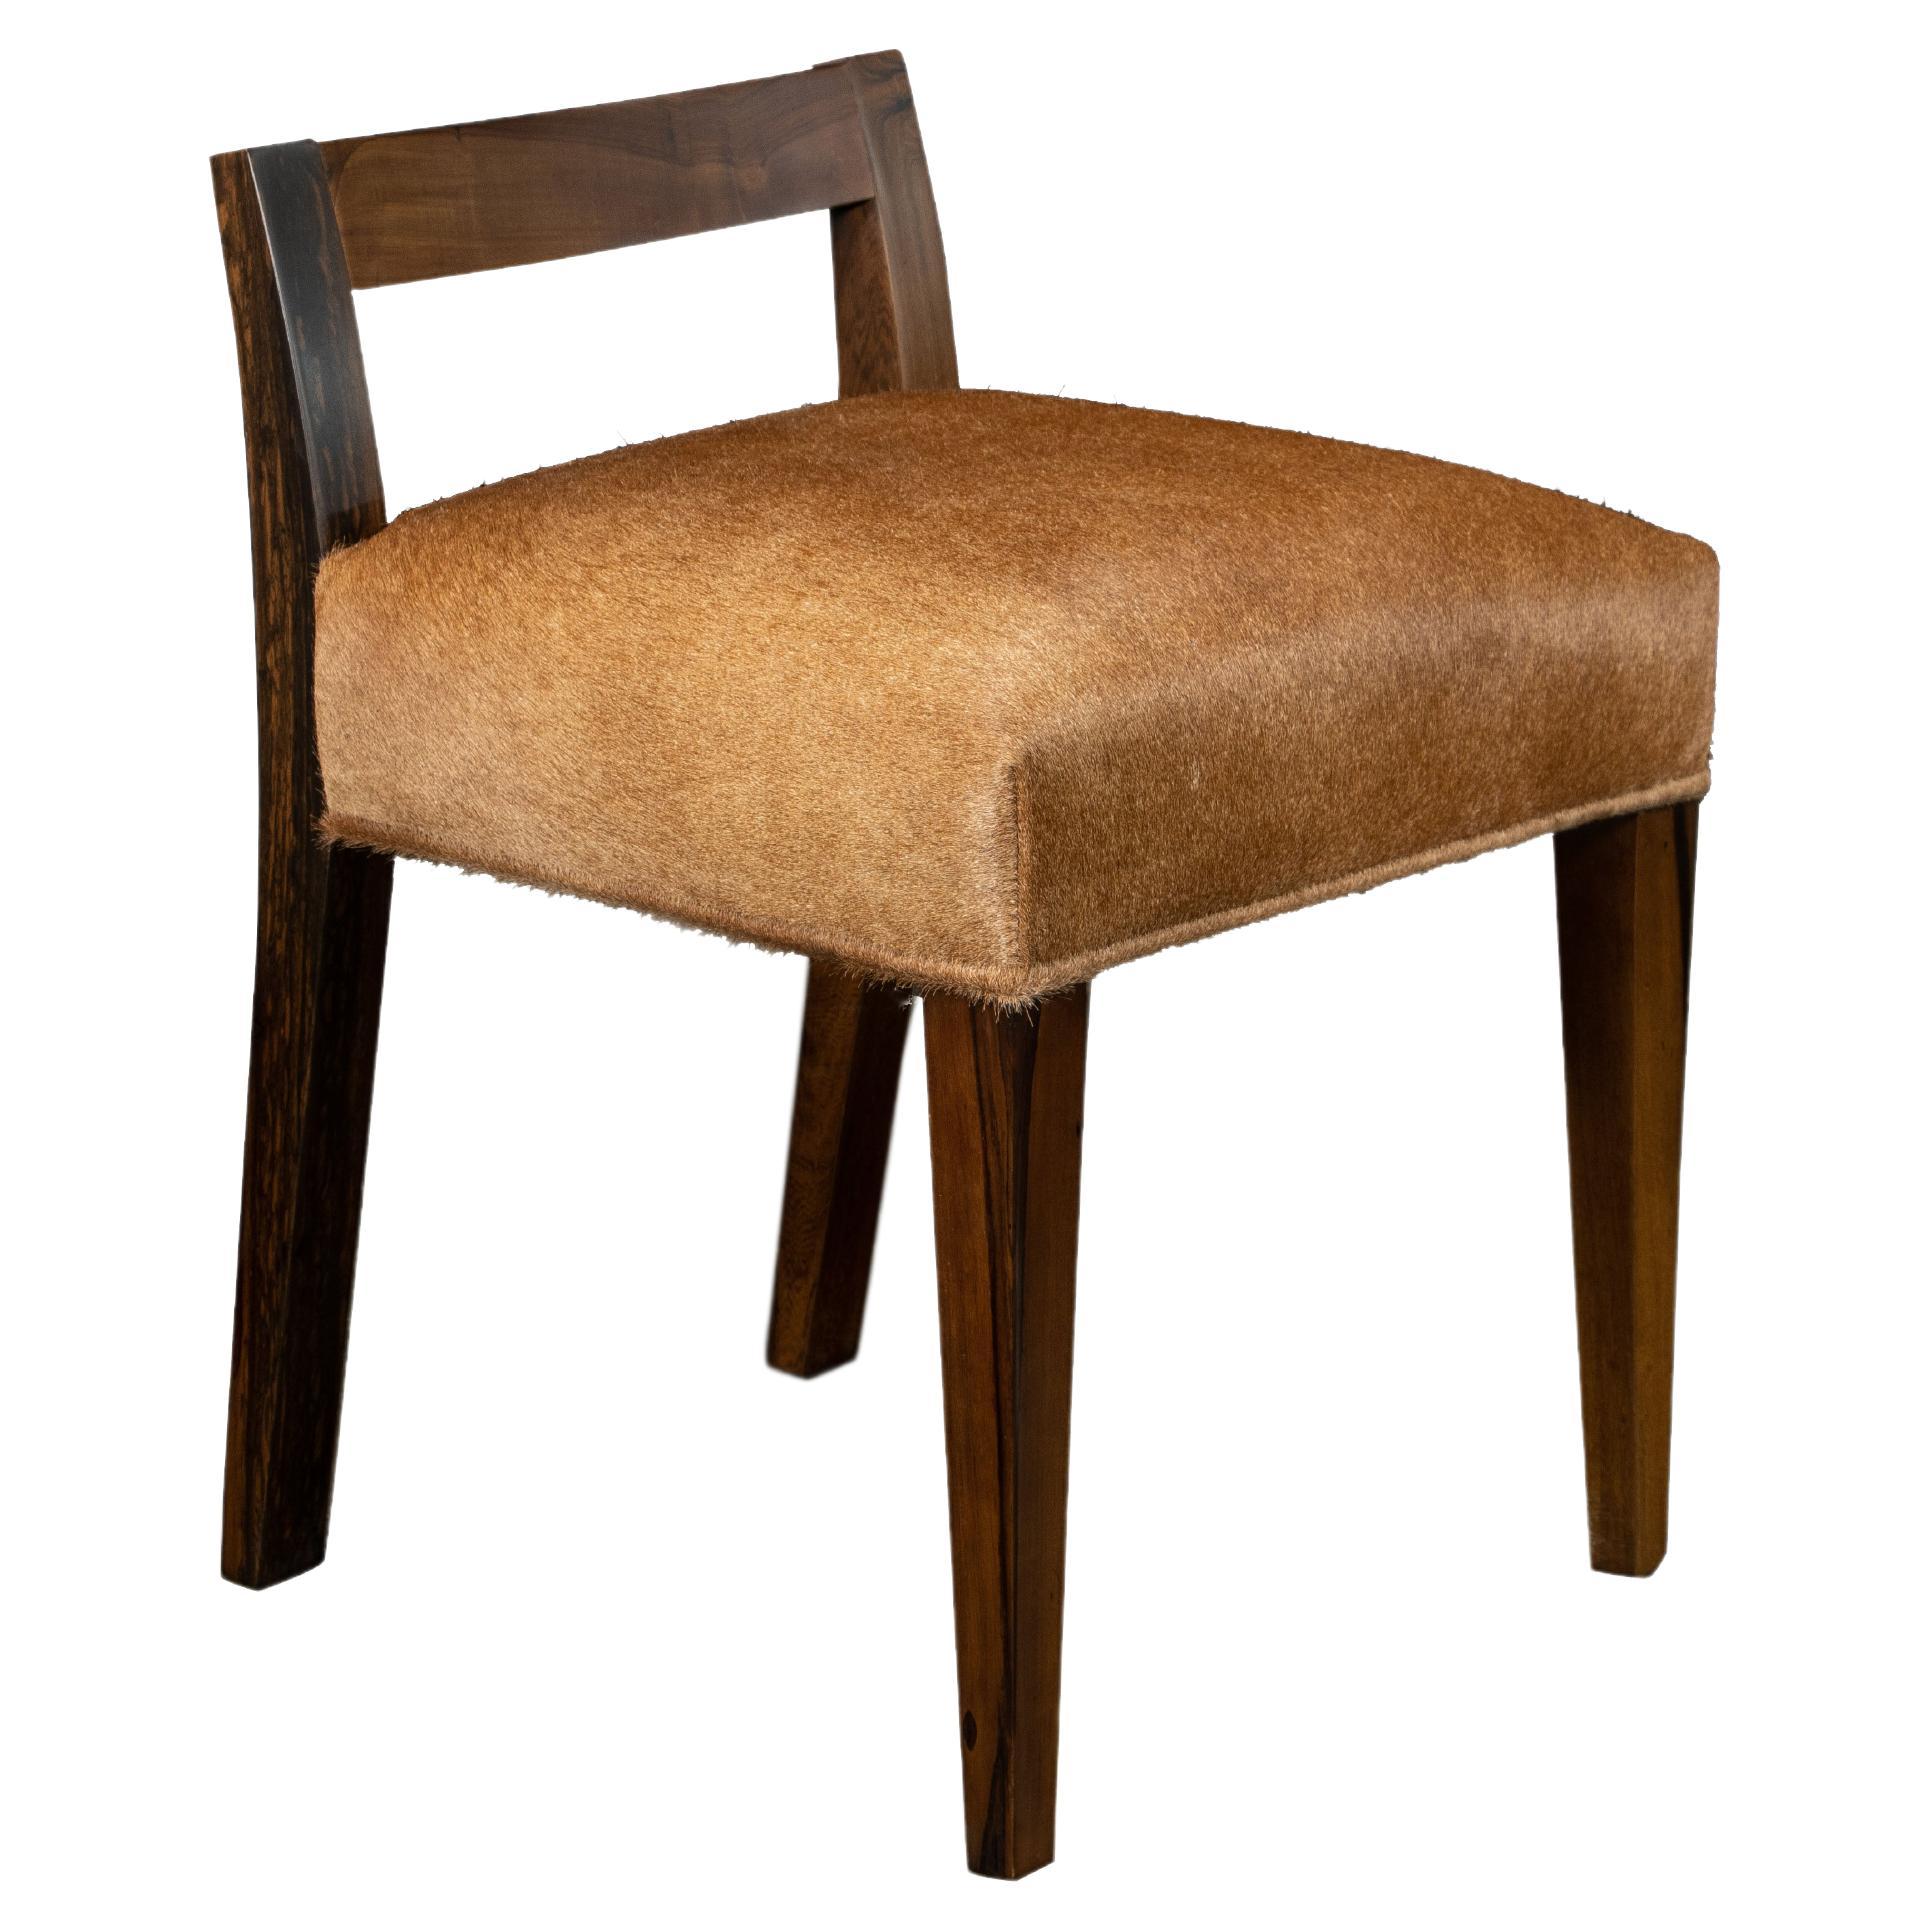 Modern Low Side Chair in Exotic Wood & Hair Hide from Costantini, Umberto  For Sale